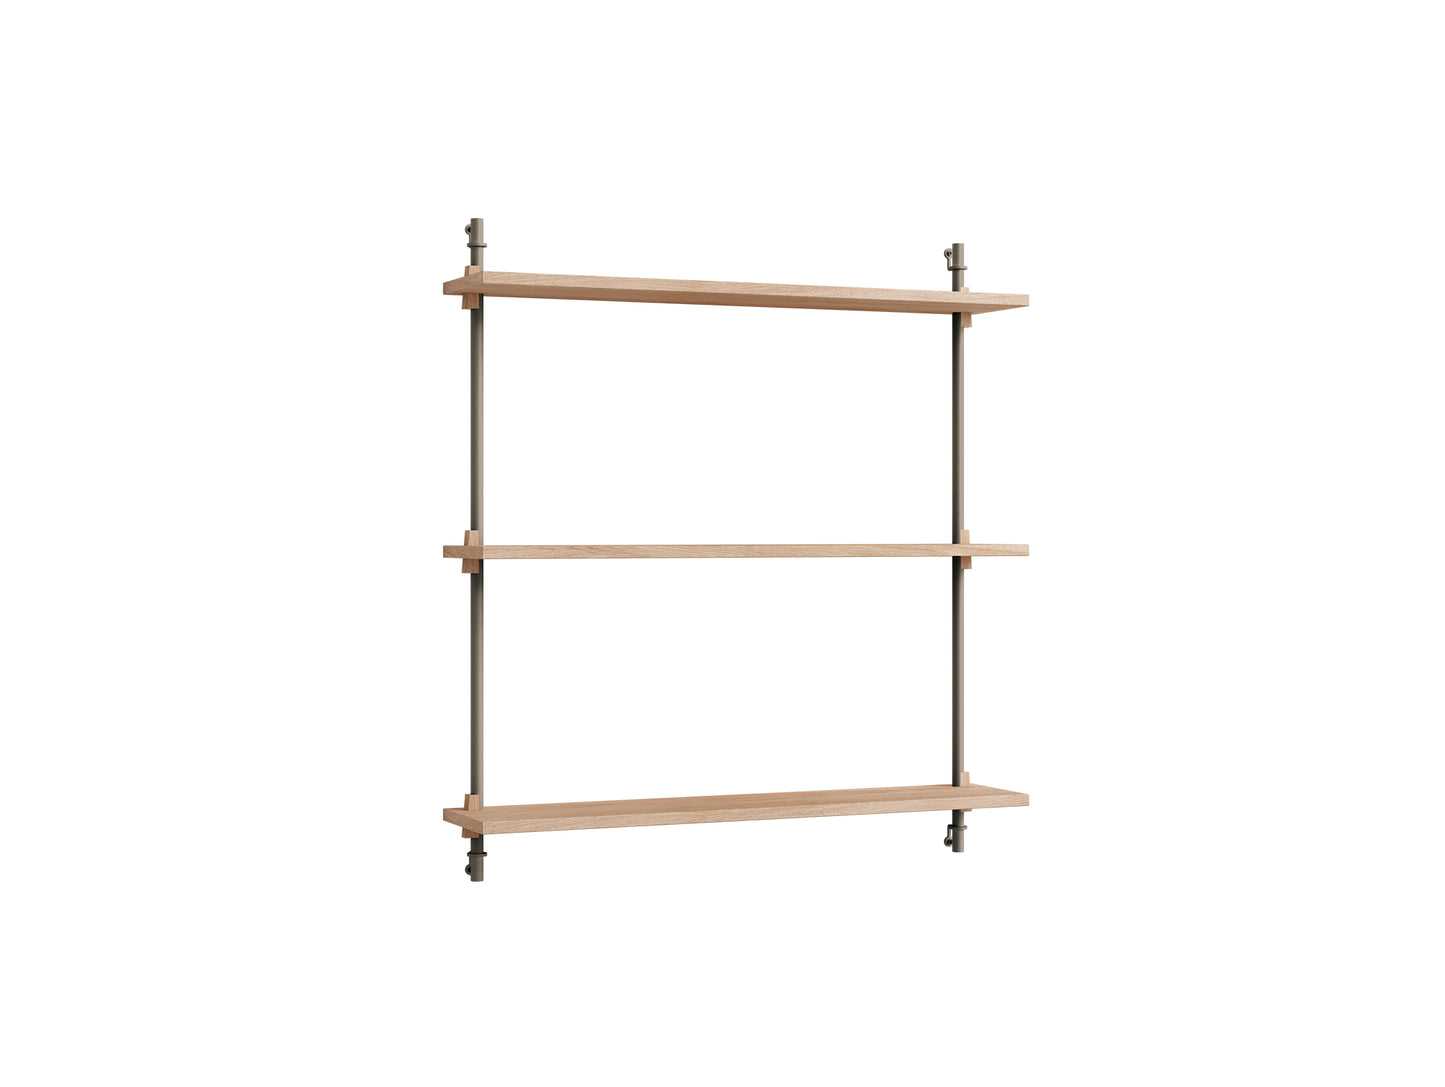 Wall Shelving System Sets (85 cm) by Moebe - WS.85.1 /  Warm Grey Uprights / Oiled Oak